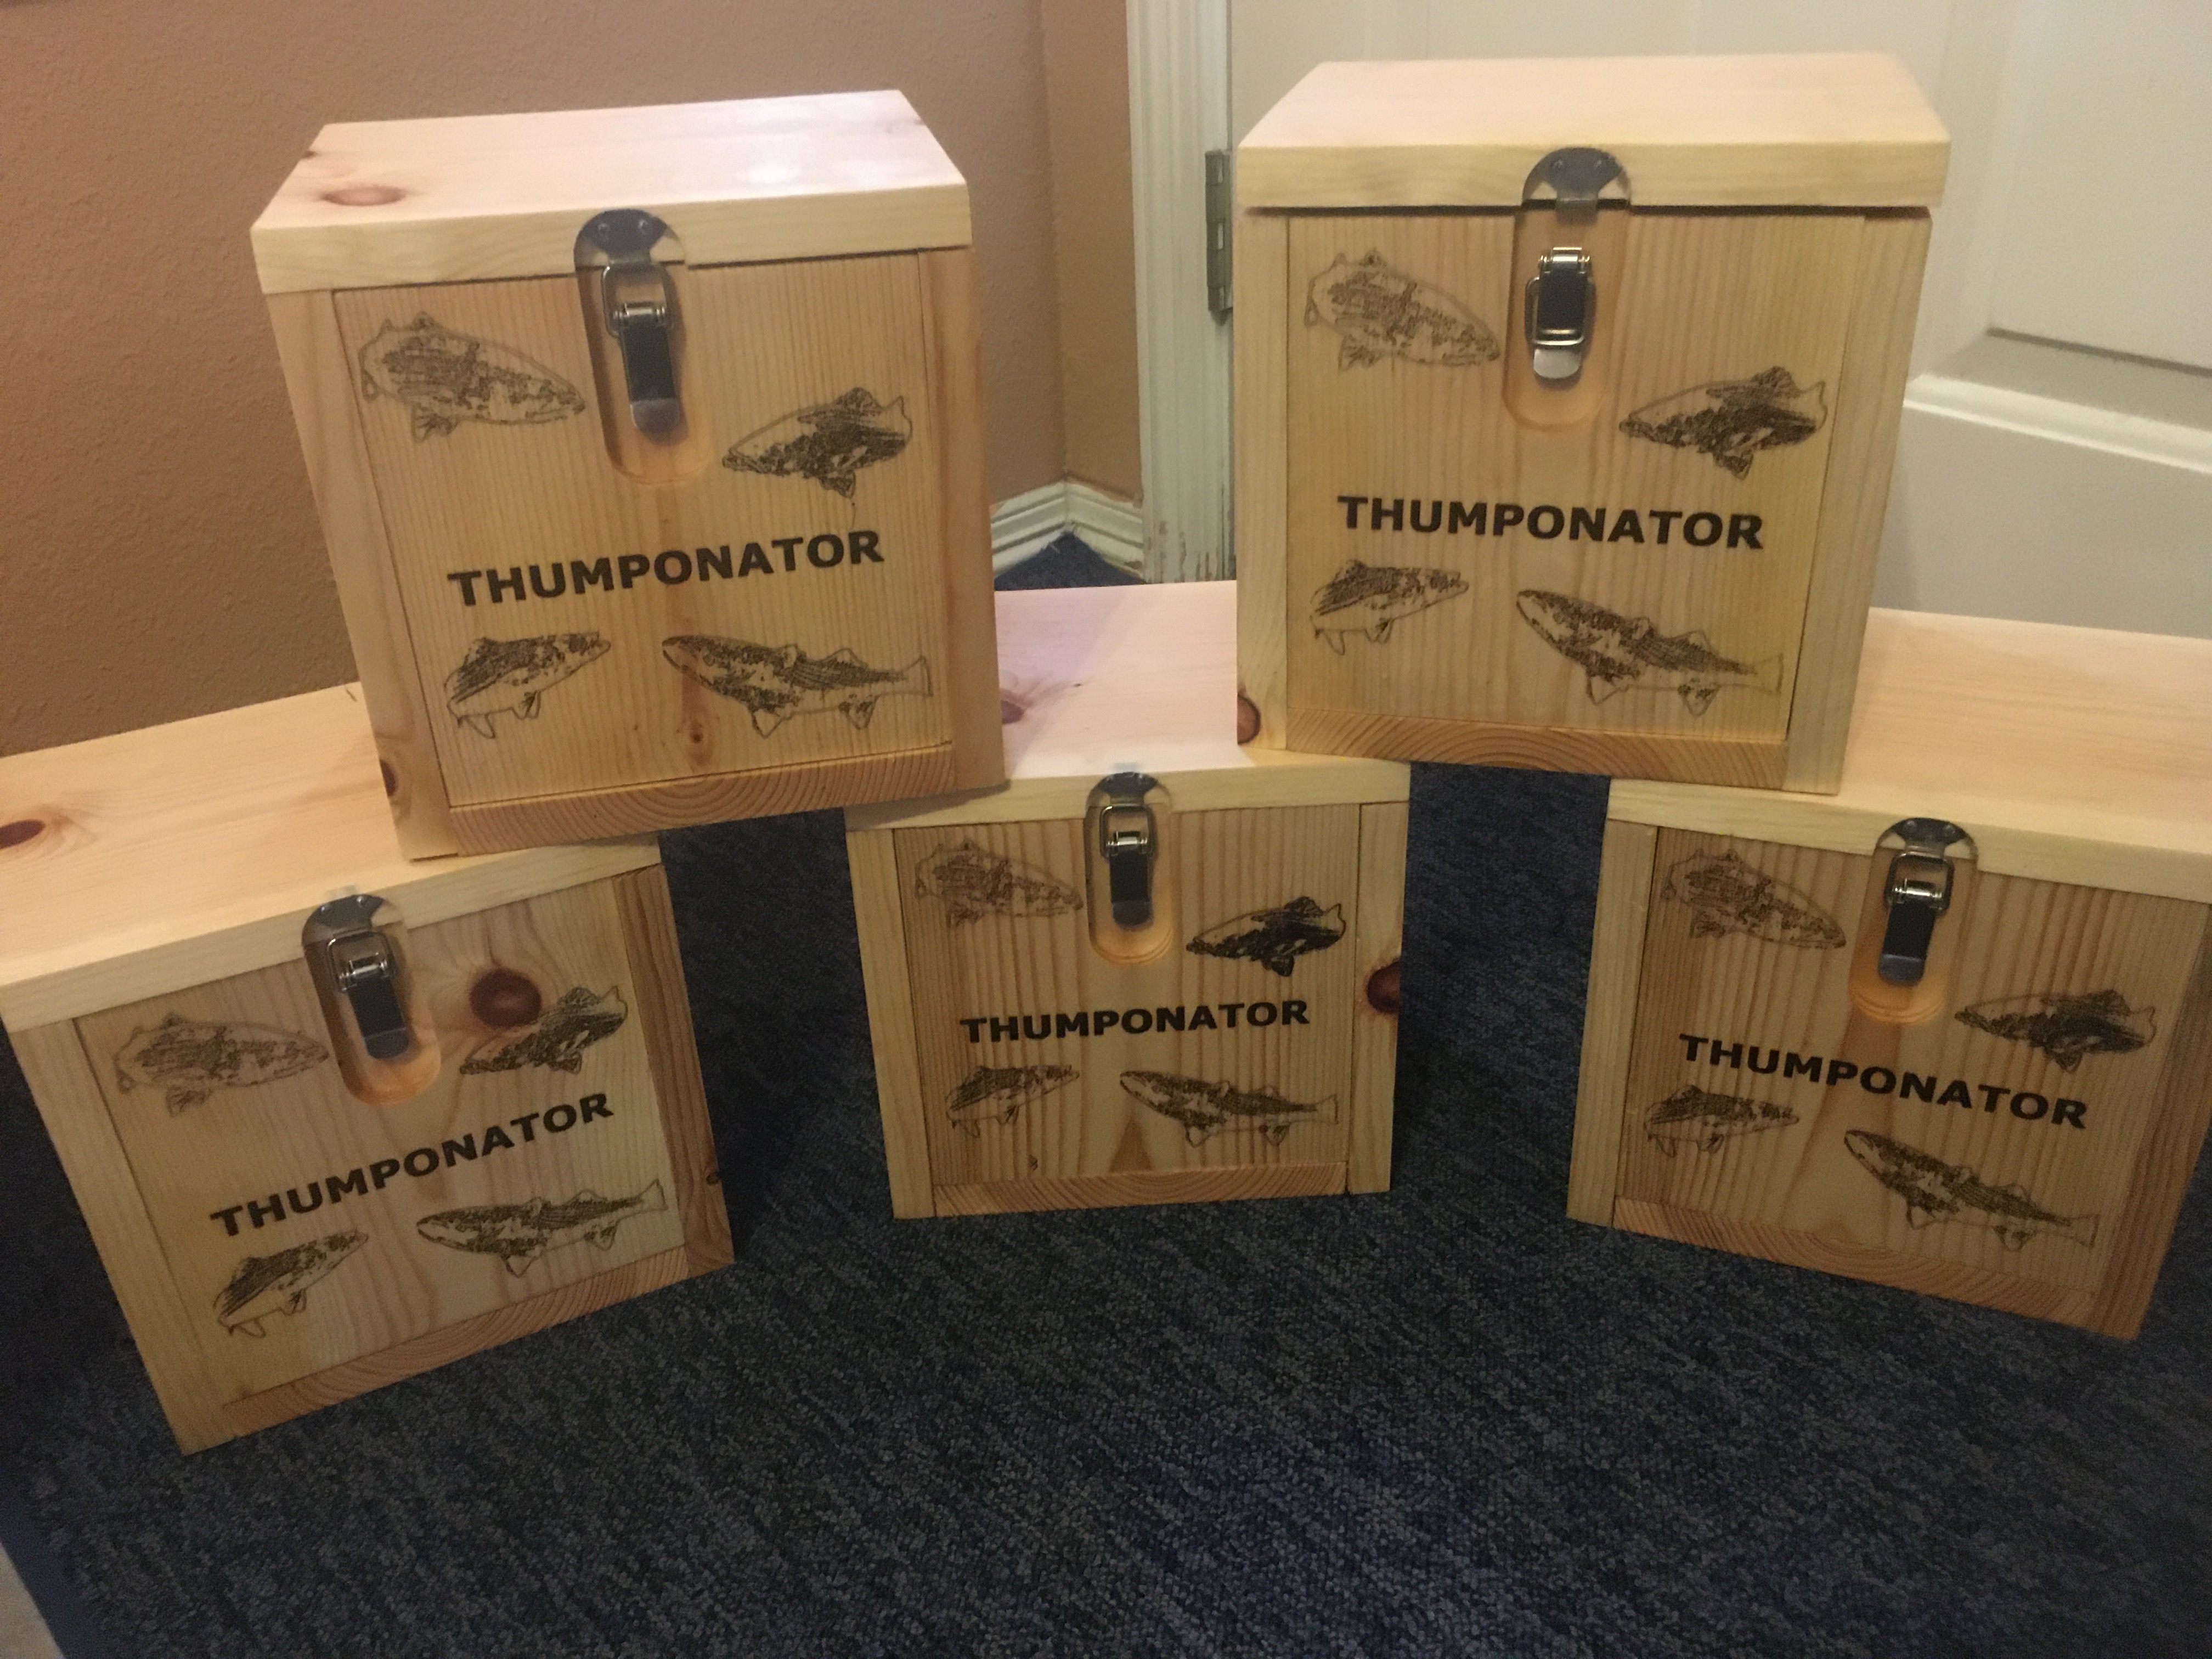 The THUMPONATOR, a fishing Thumping Device